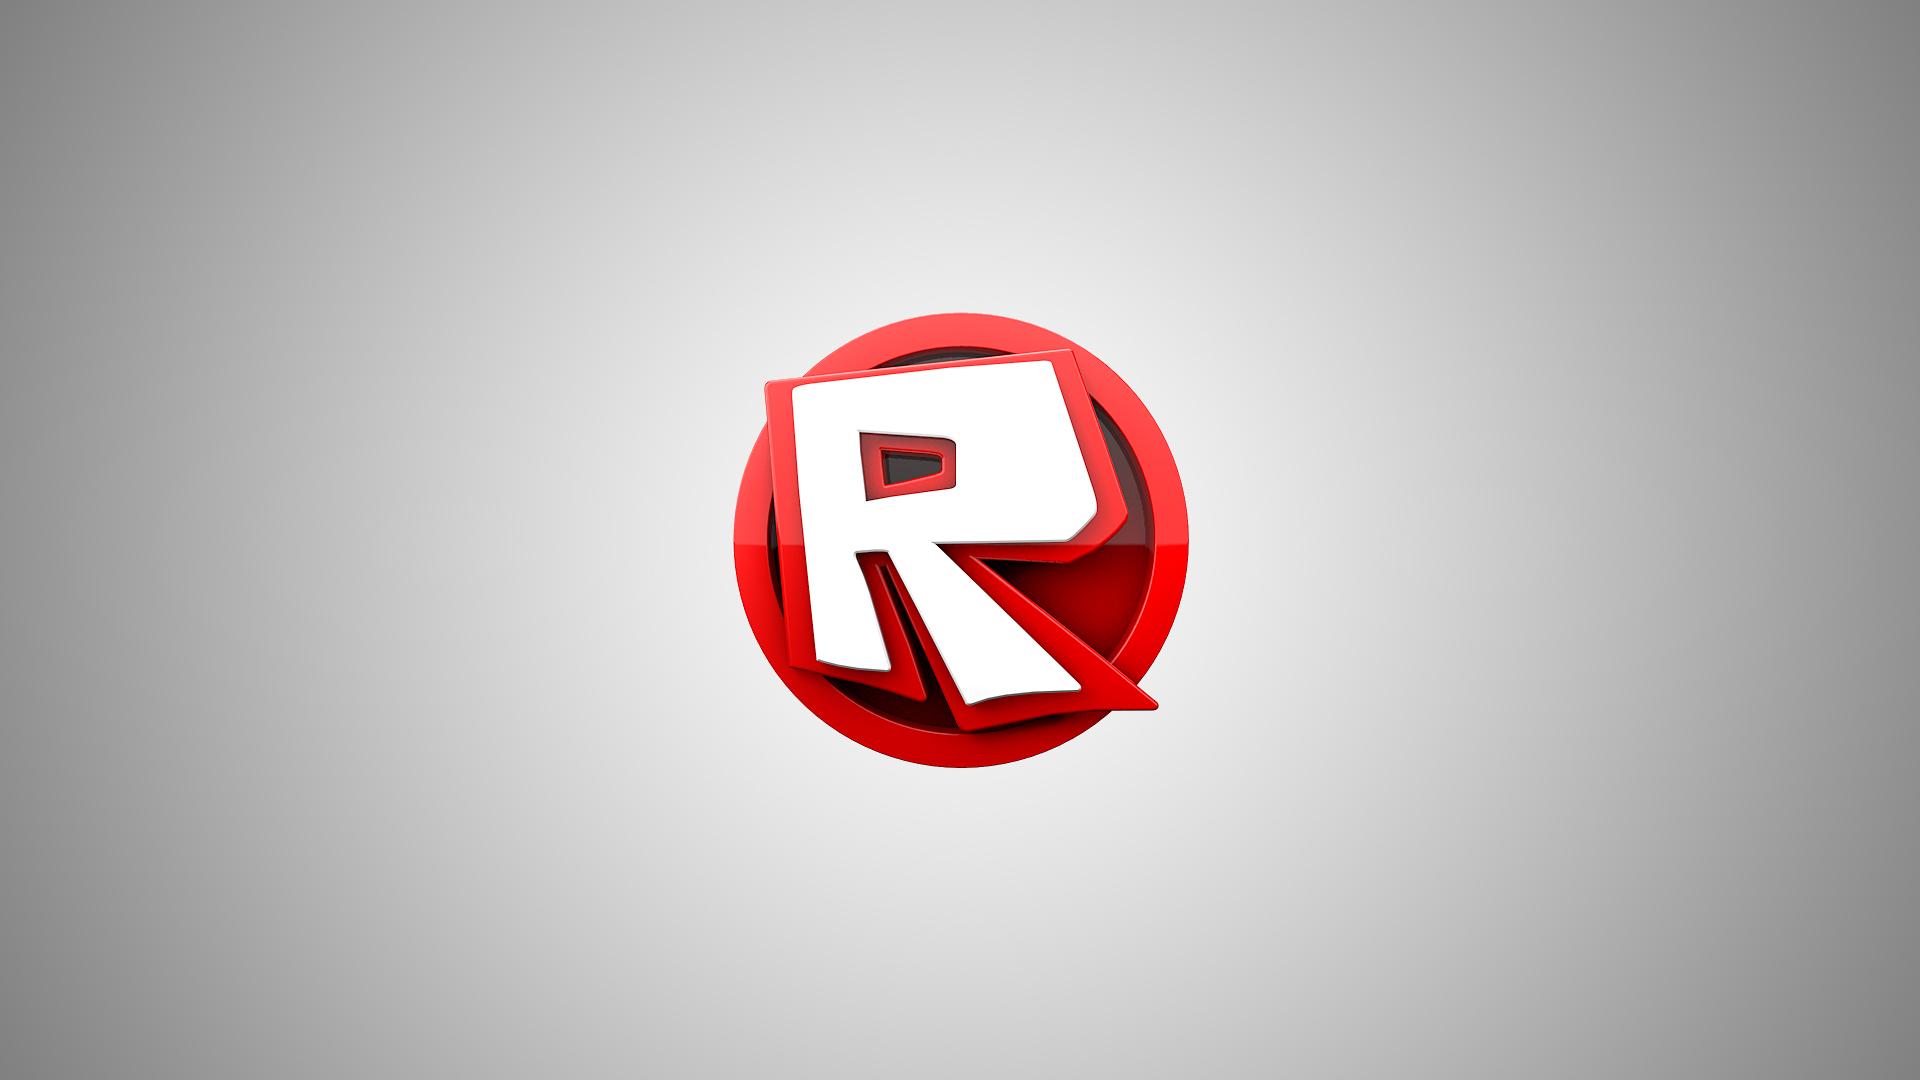 Roblox Wallpaper. BFFs Roblox Wallpaper, Roblox YouTube Wallpaper and Roblox Background Girl